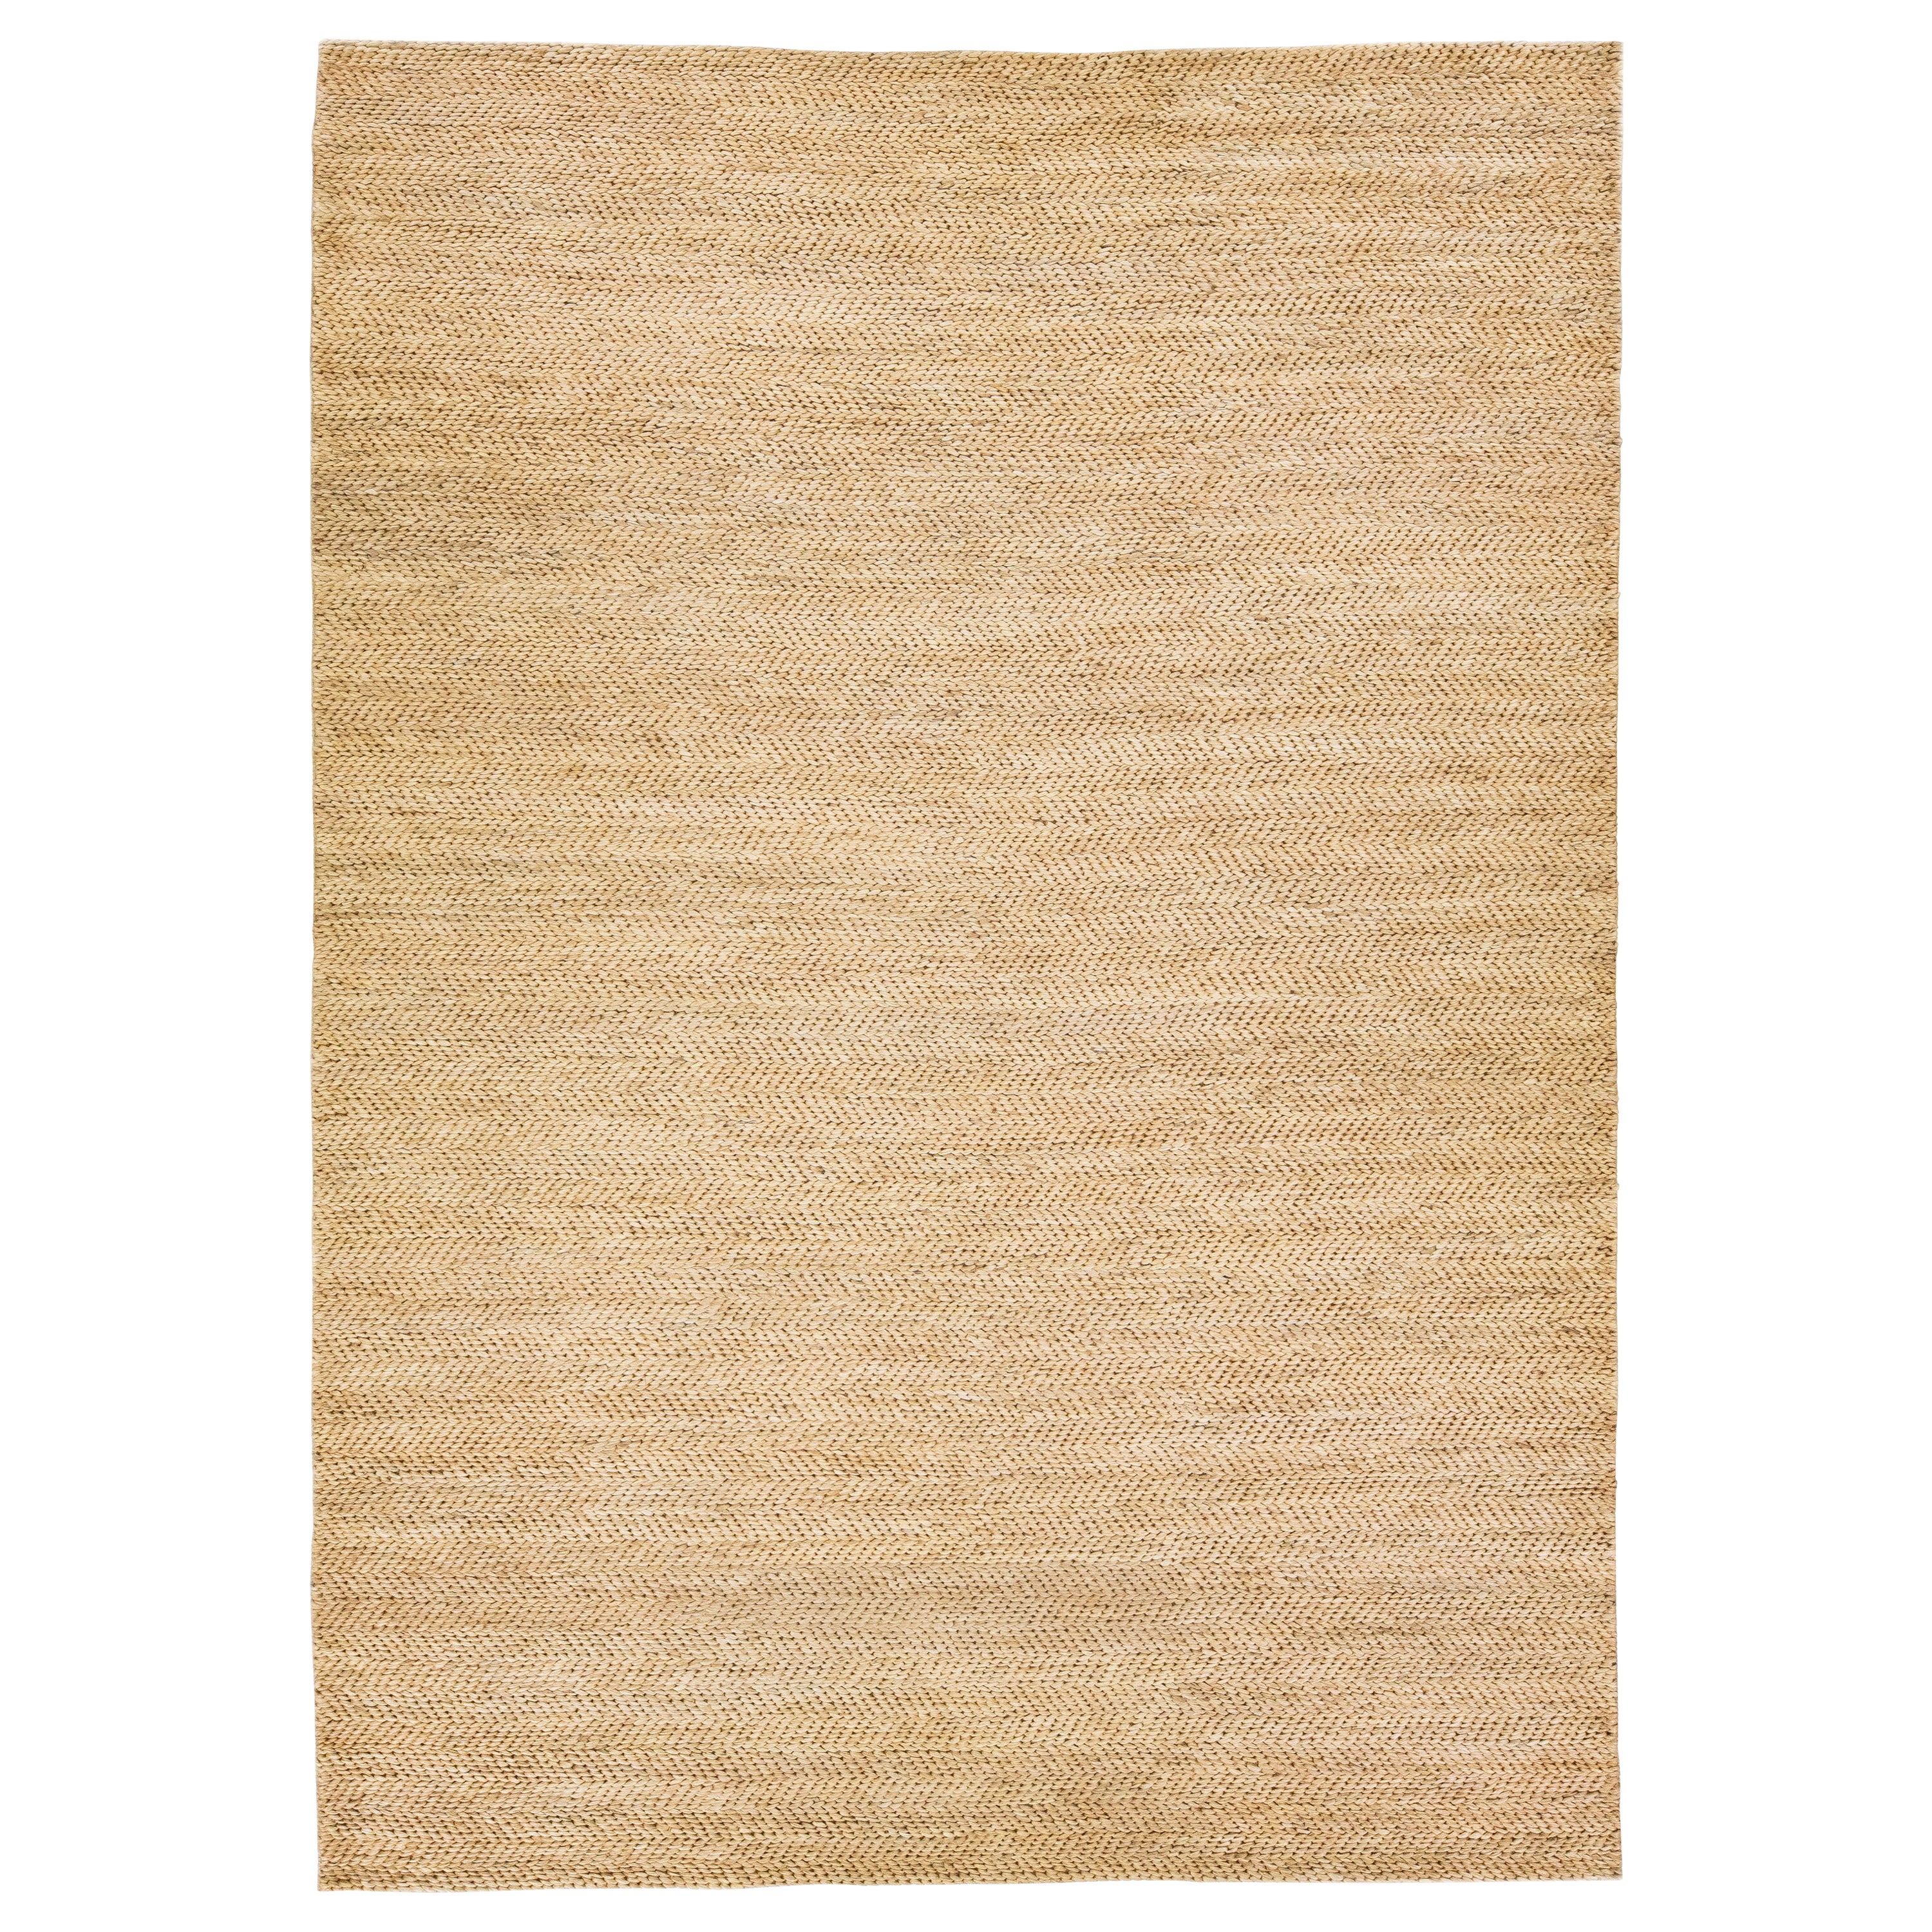 Modern Natural Texture Hand Woven Jute & Cotton Area Rug For Sale